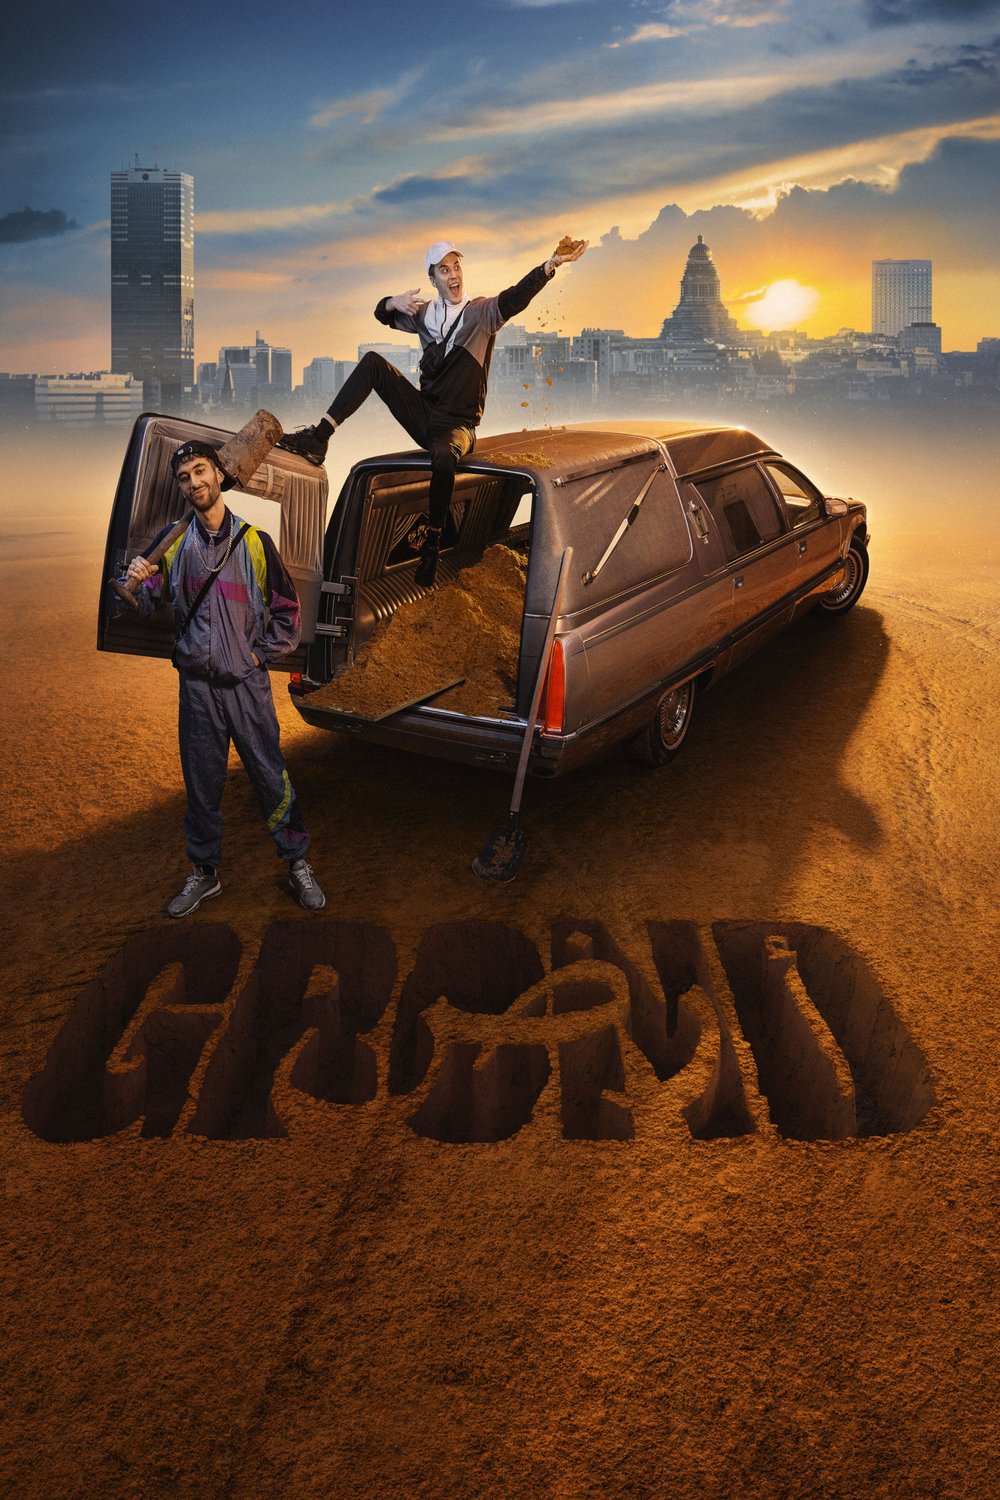 Arabic poster of the movie Grond